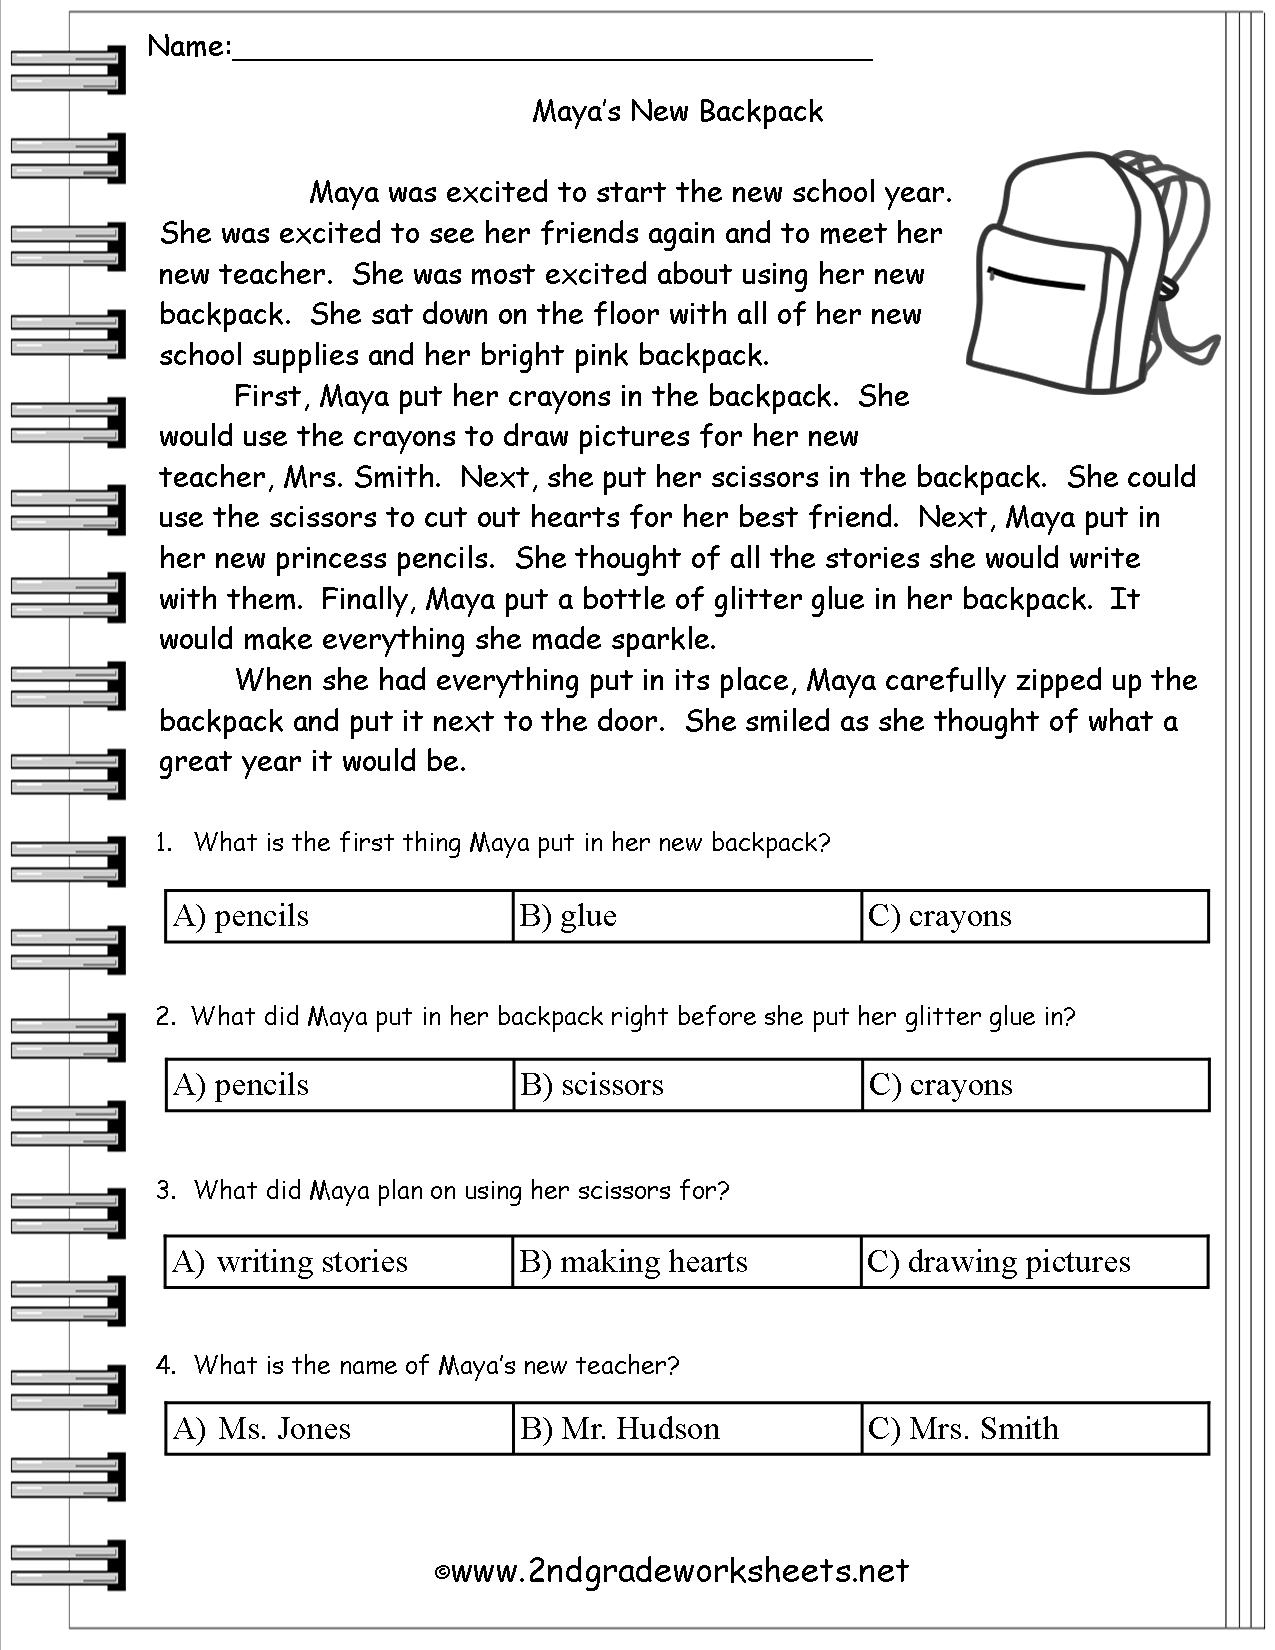 Free Back To School Worksheets And Printouts - Free Printable Short Stories With Comprehension Questions